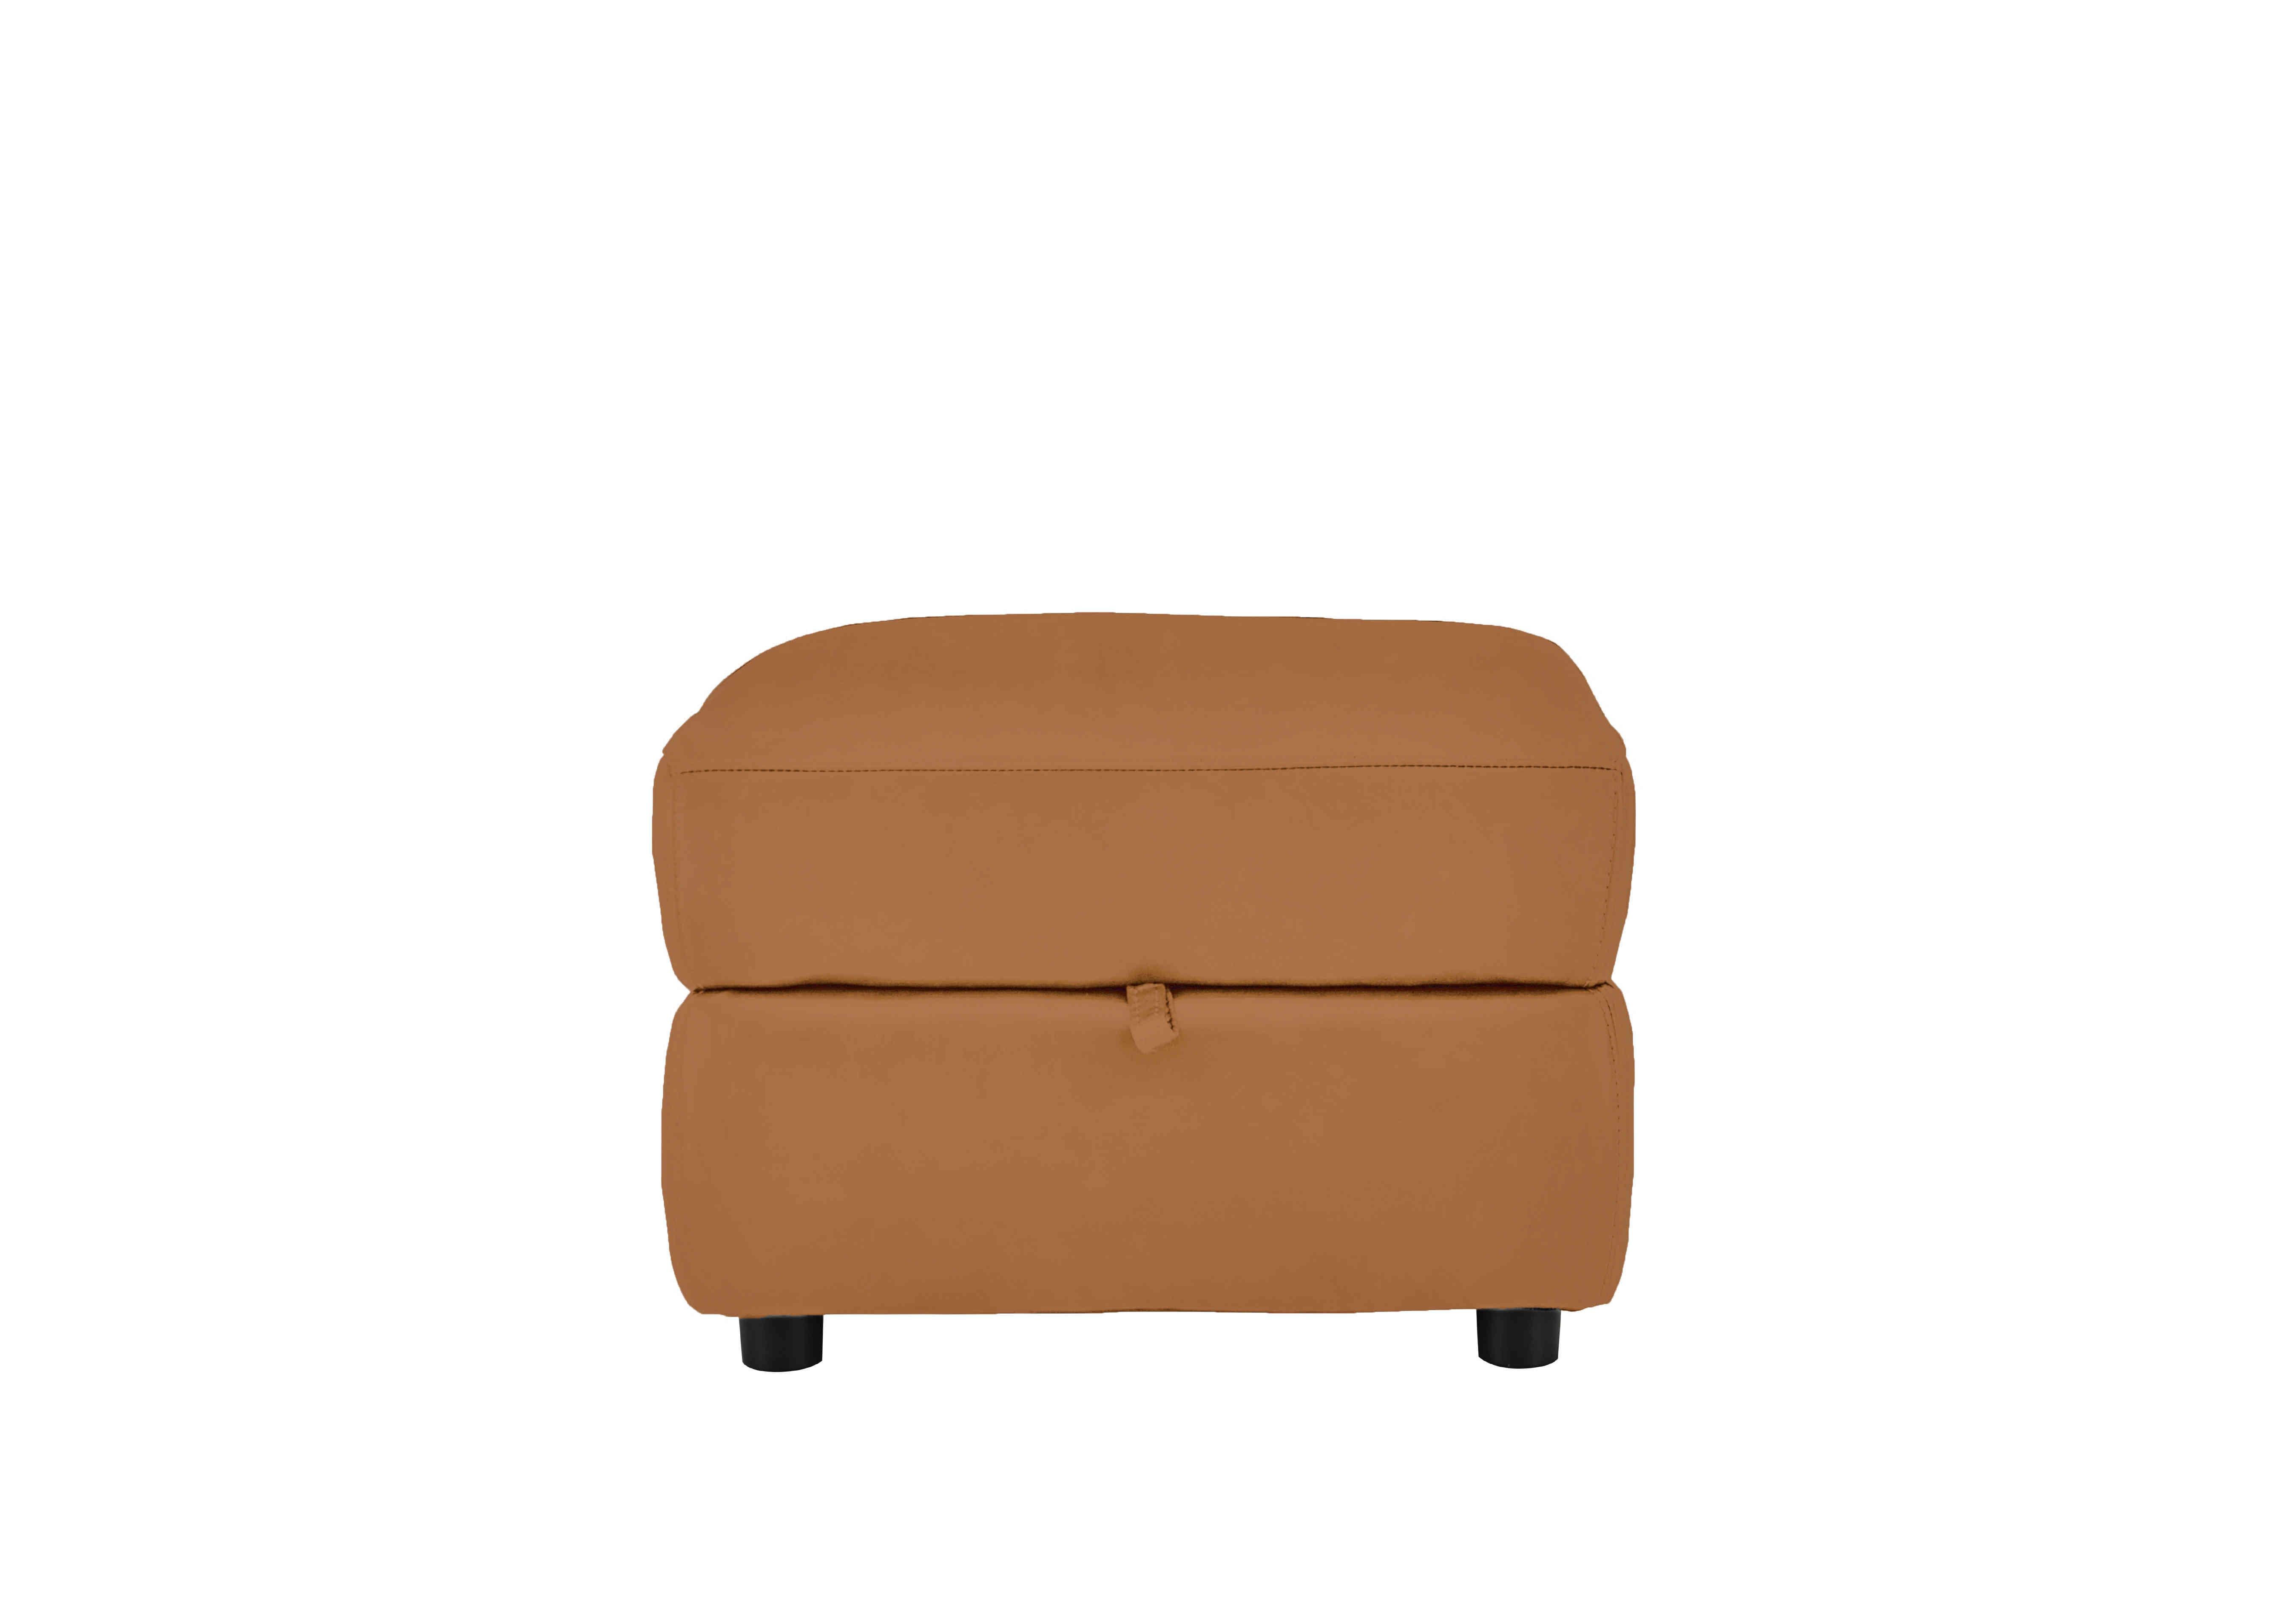 Relax Station Revive Leather Storage Footstool in Bv-335e Honey Yellow on Furniture Village